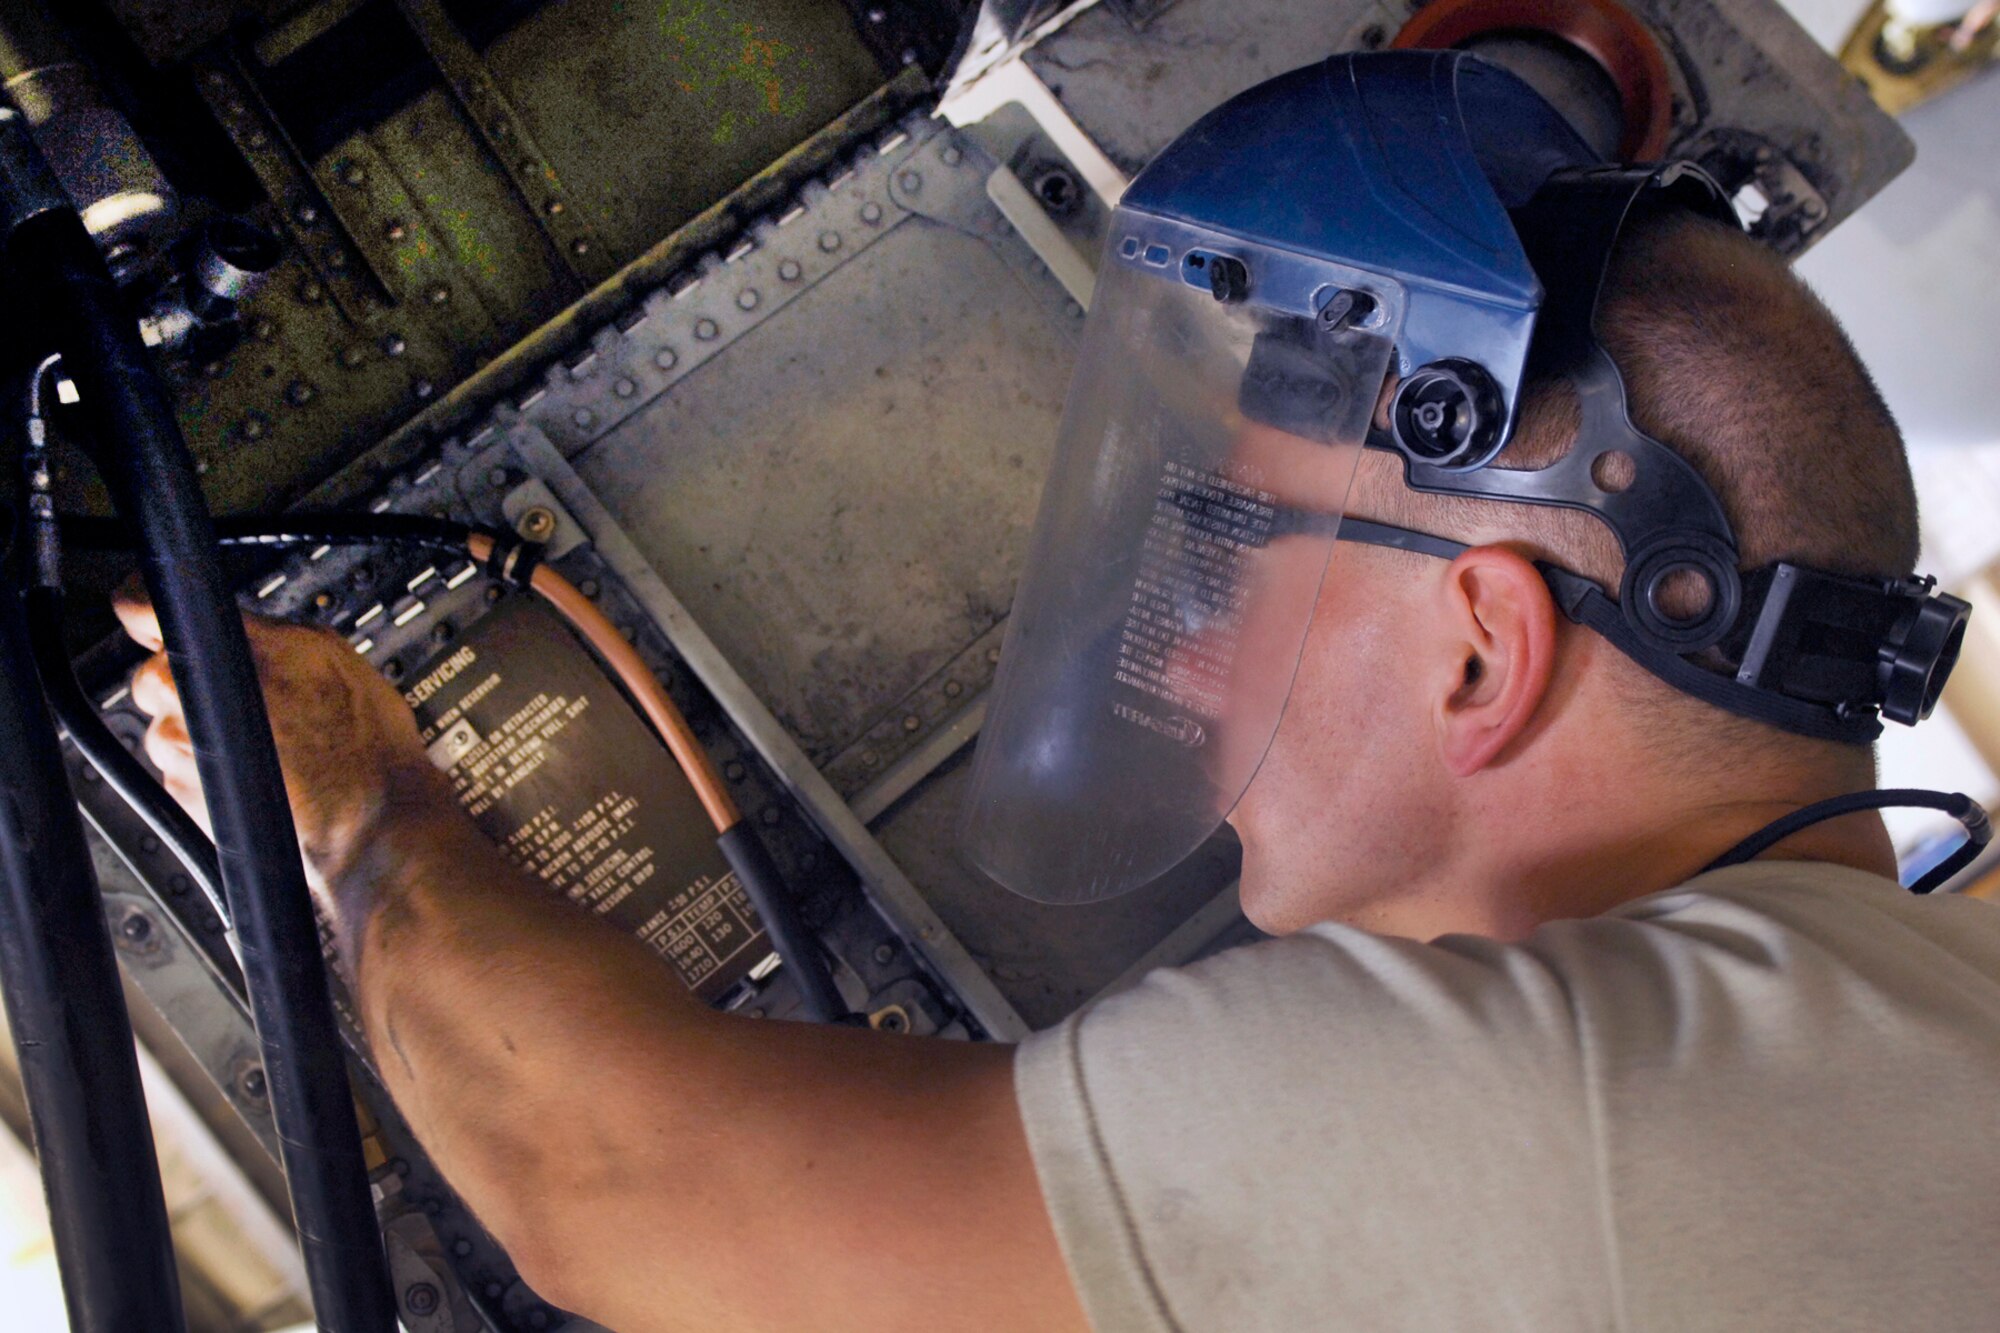 SrA William Fine, an aircraft maintenance technician assigned to the 455th Expeditionary Aircraft Maintenance Squadron, adjusts the bootstrap accumulator on an A-10 Thunderbolt II during a seven-level inspection at Bagram Airfield, Afghanistan, Aug, 9, 2012. Each time an A-10 accomplishes 500 flying hours, the maintainers put the aircraft through a periodic maintenance phase which lasts approximately four to five days. During this time, the maintainers give the aircraft a complete overhaul, looking for foreign object debris, damage, cracked or worn parts. They also ensure that every section of the airframe is intact with each piece in place. (U.S. Air Force photo/SSgt Jeff Nevison)